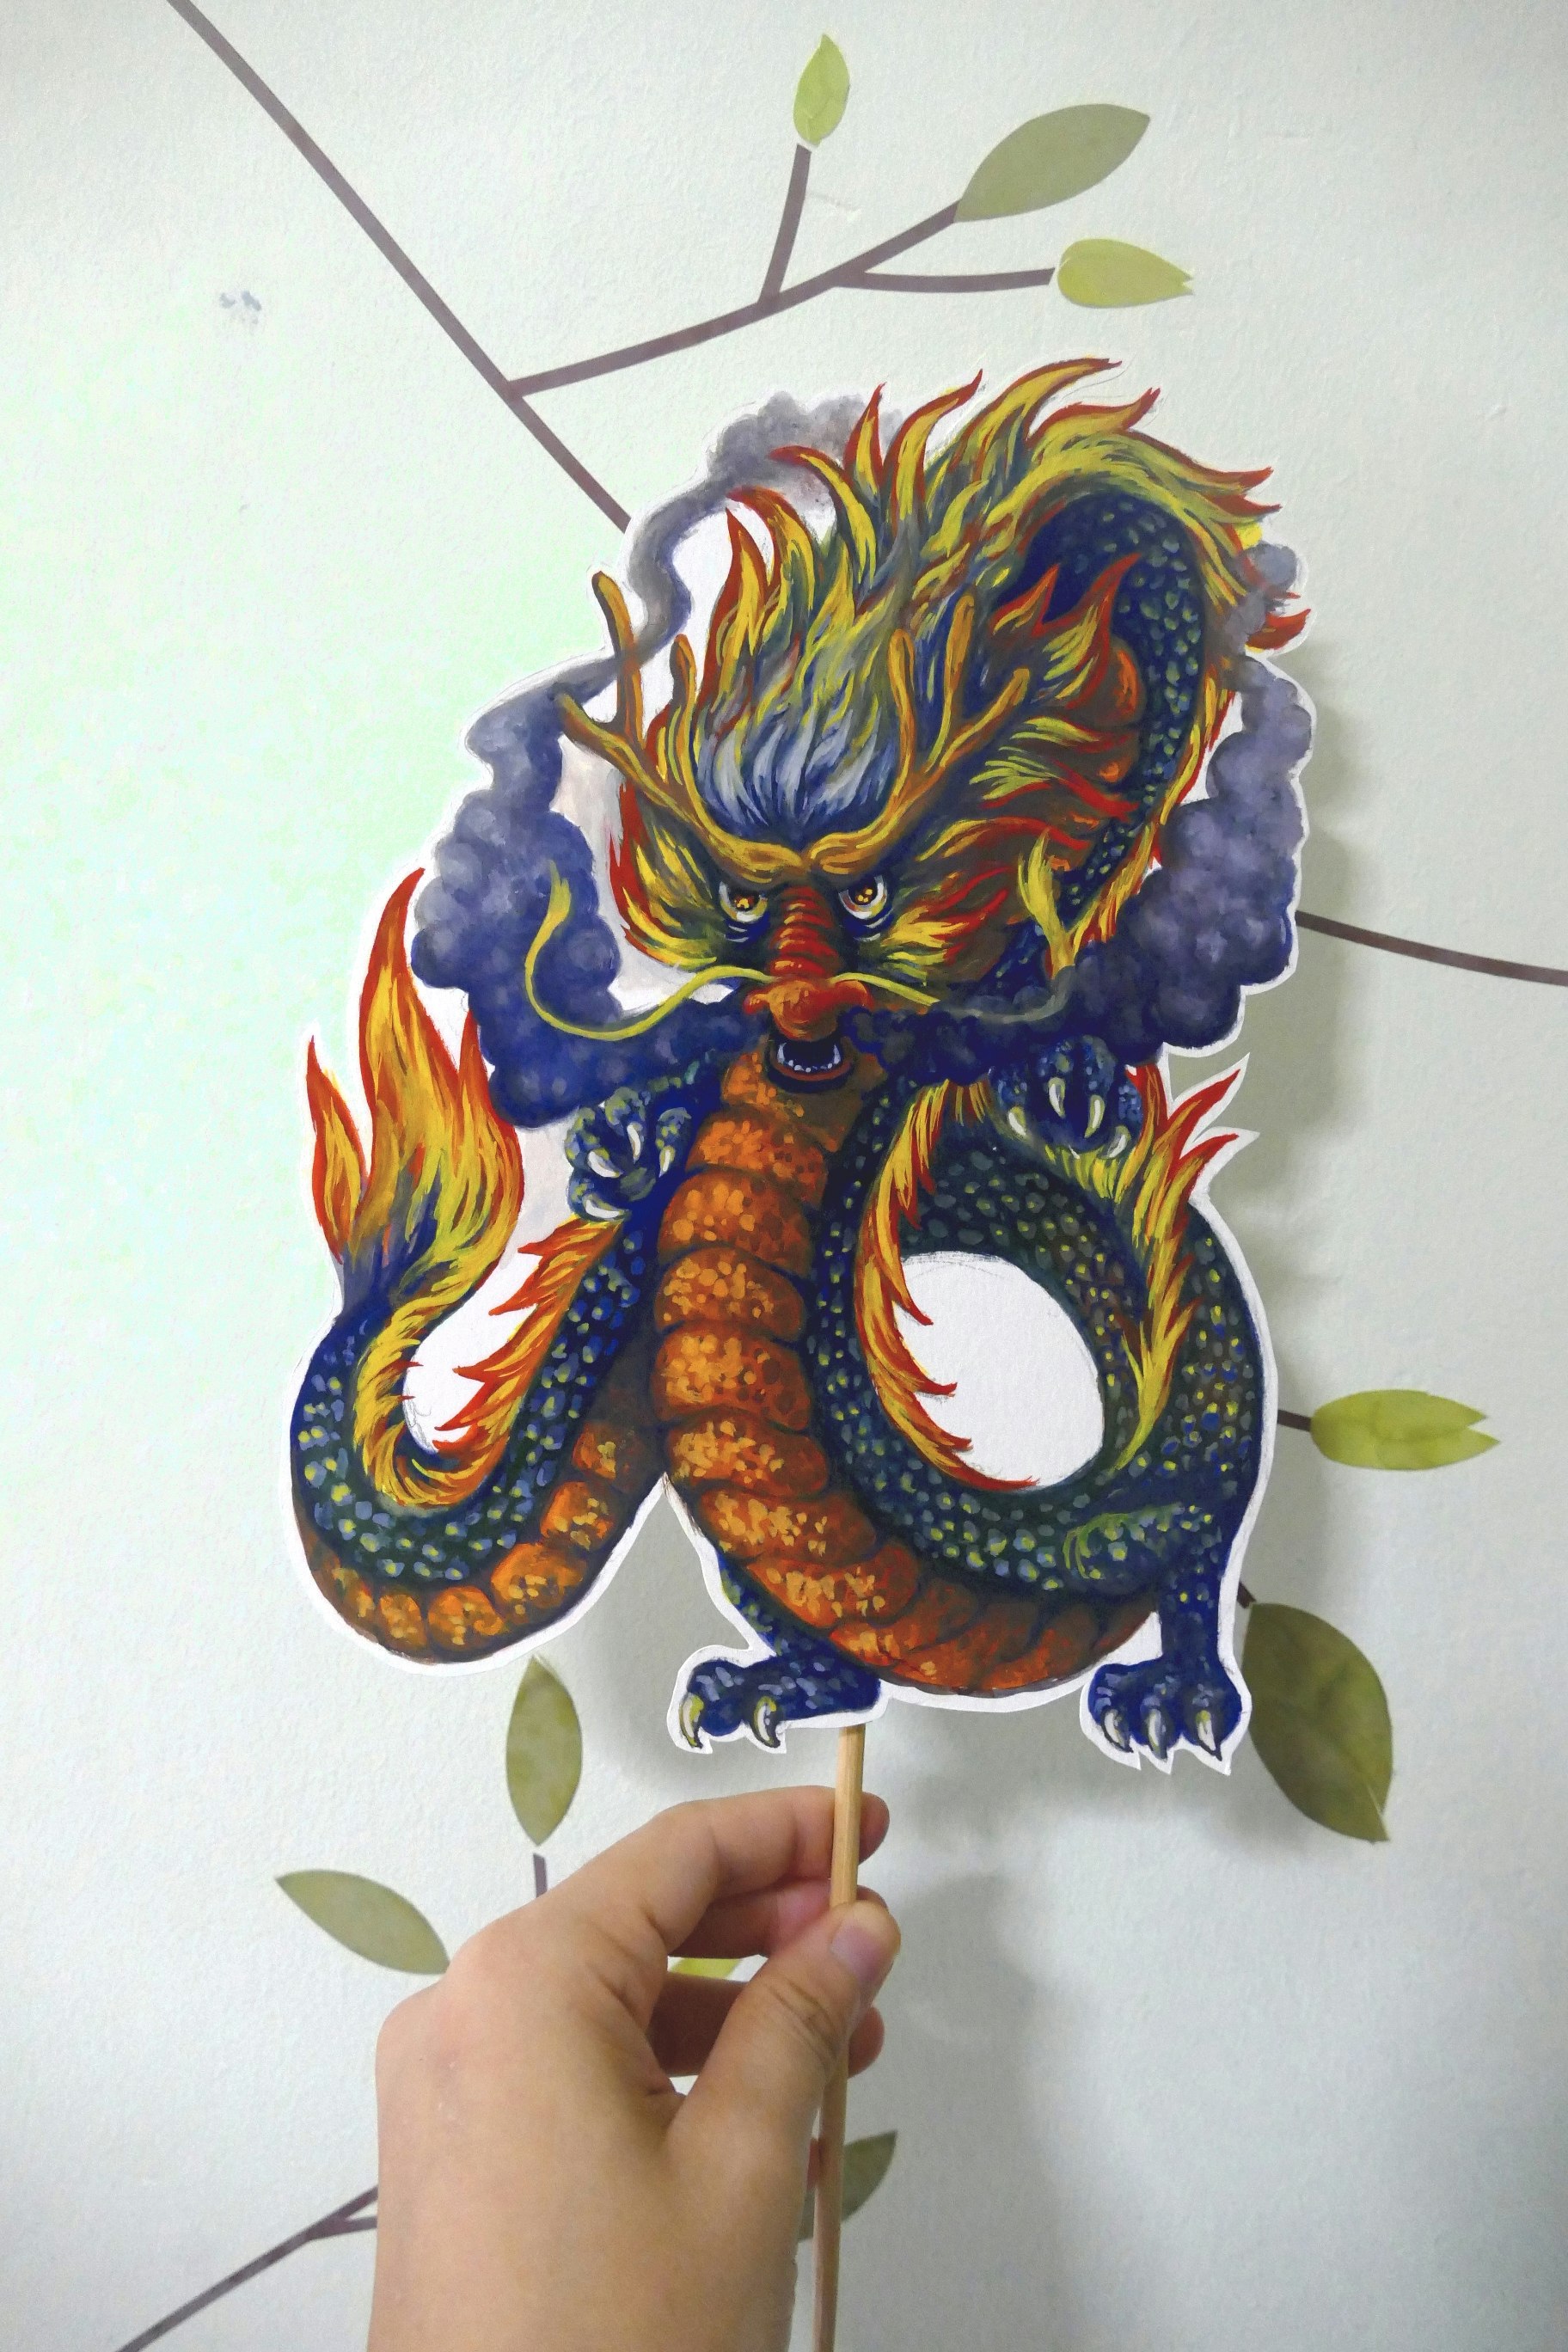 Poster painting cut-out on a stick of a menacing Chinese dragon with blue scales, a yellow belly, sharp claws, and a flaming yellow and red mane, with gray smoke bellowing out of its nostrils.